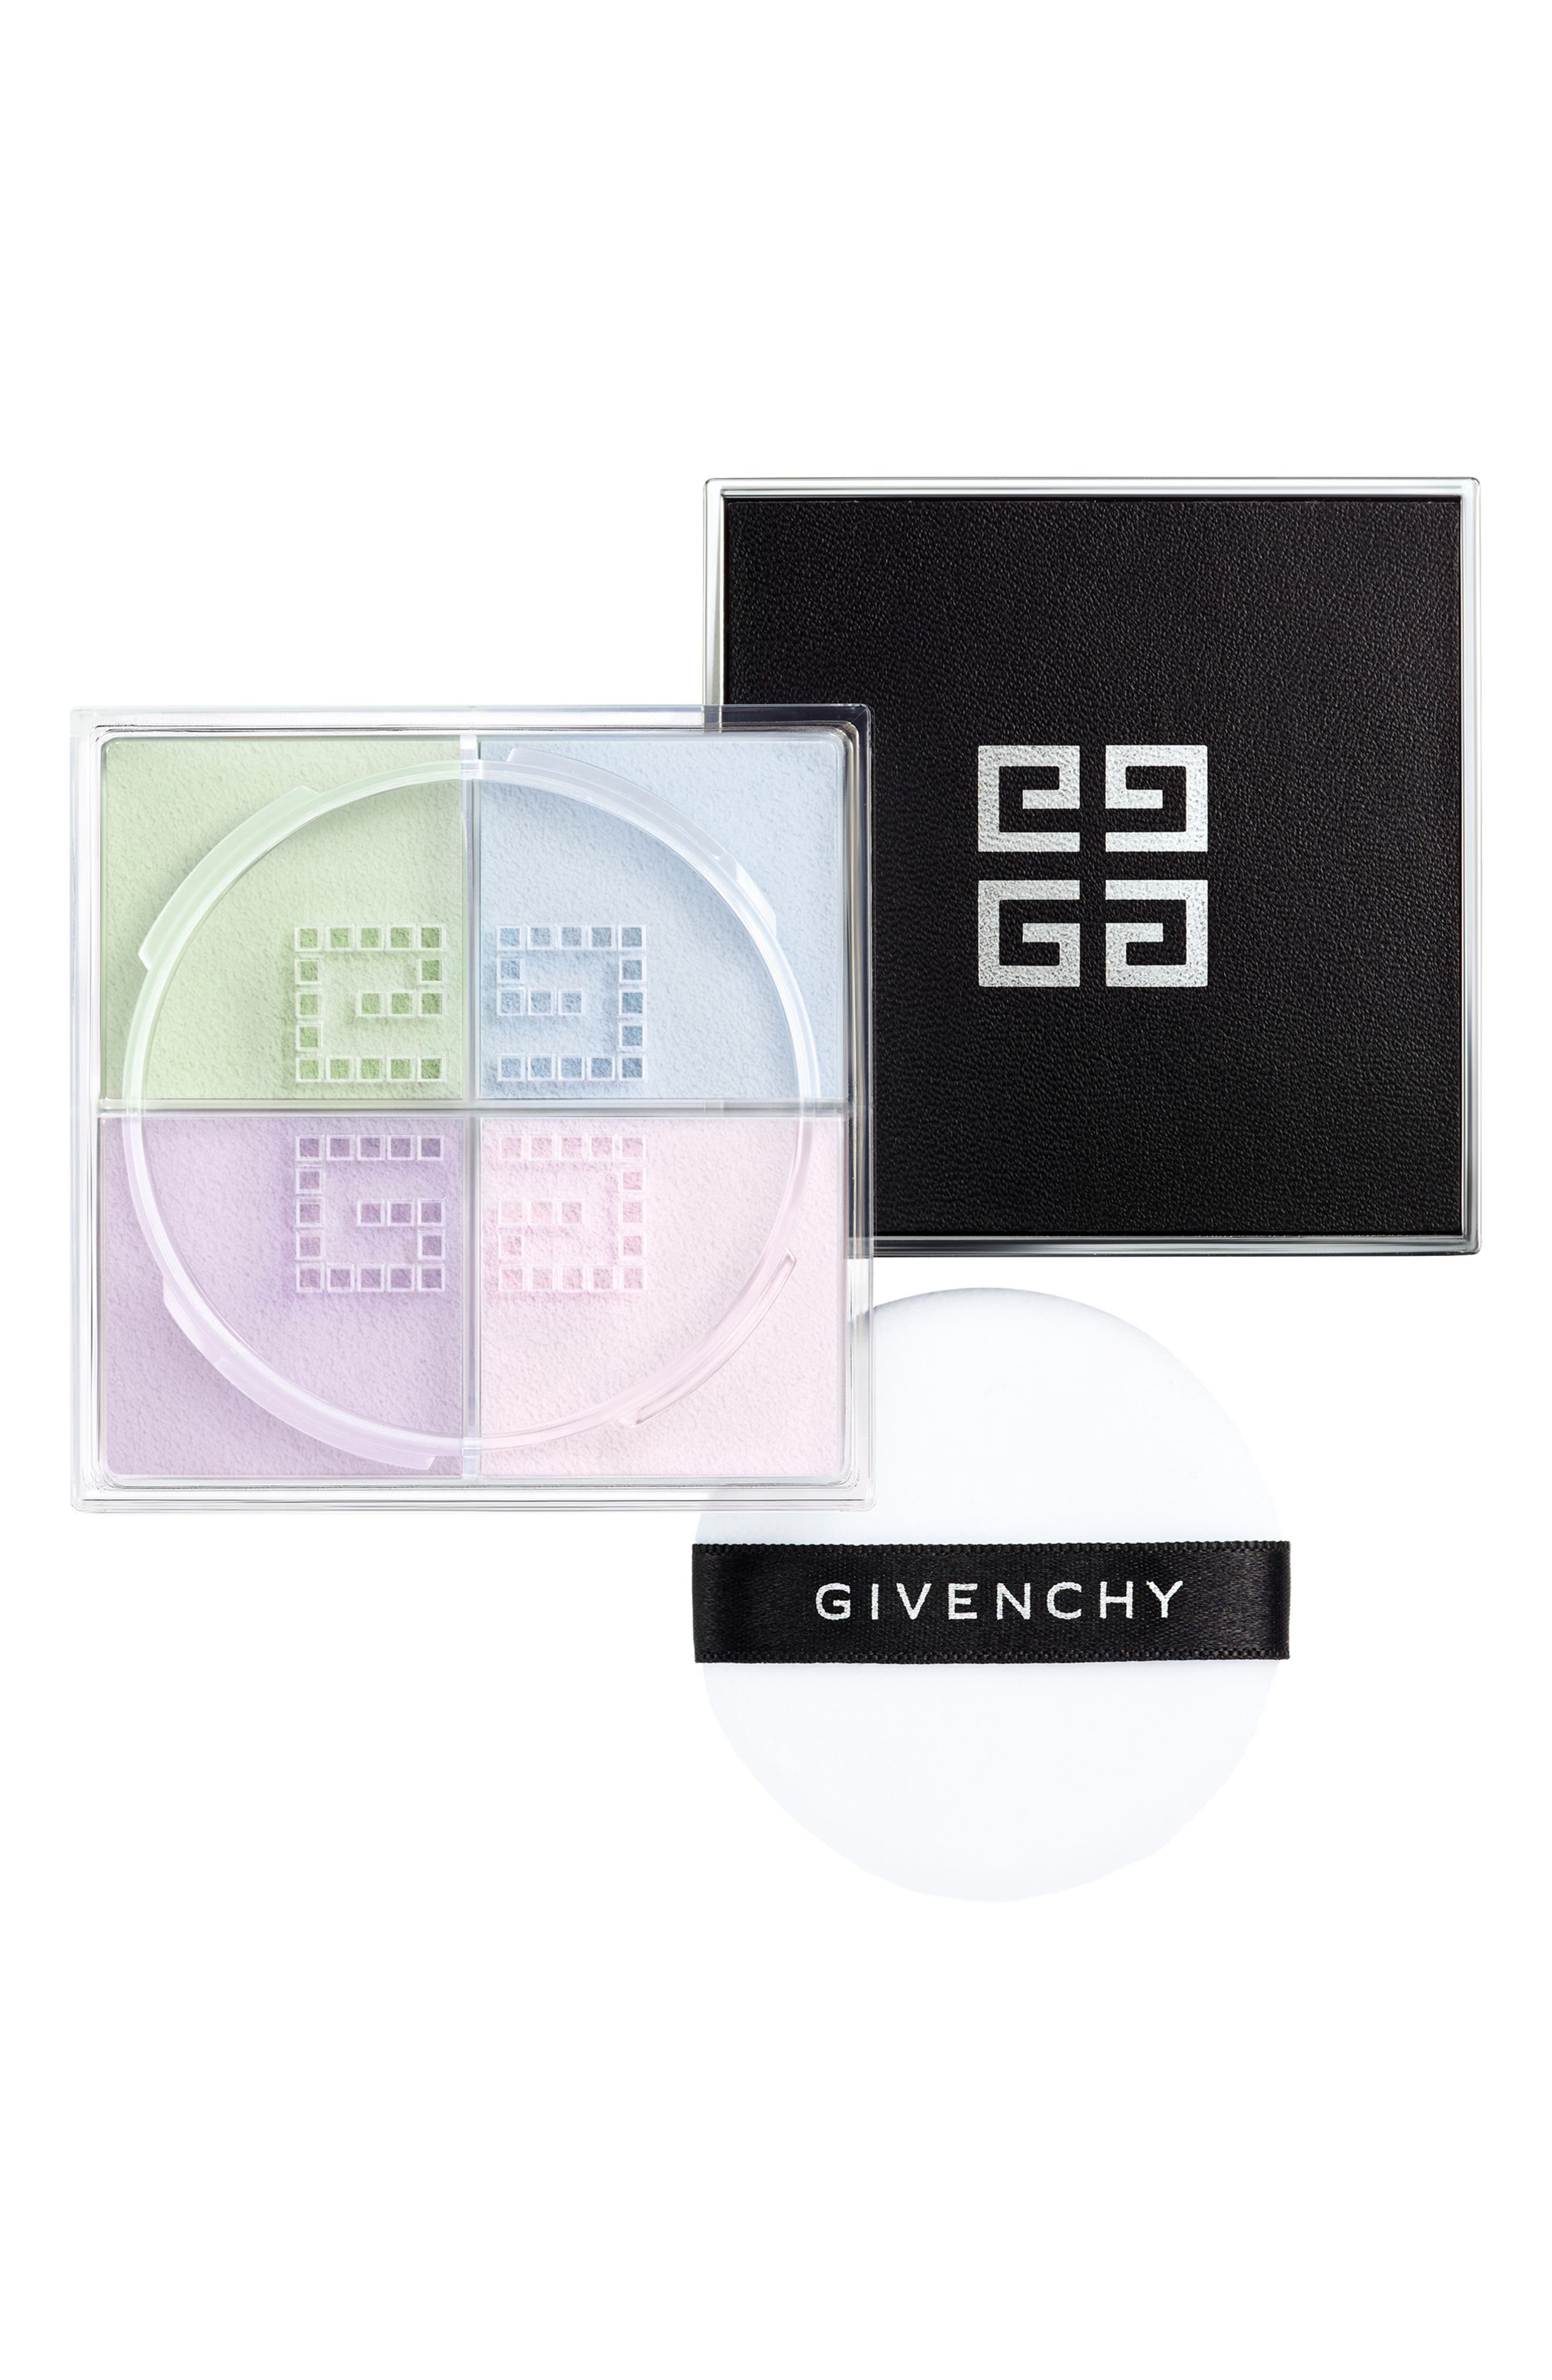 Givenchy All Beauty \u0026 Fragrance | Nordstrom